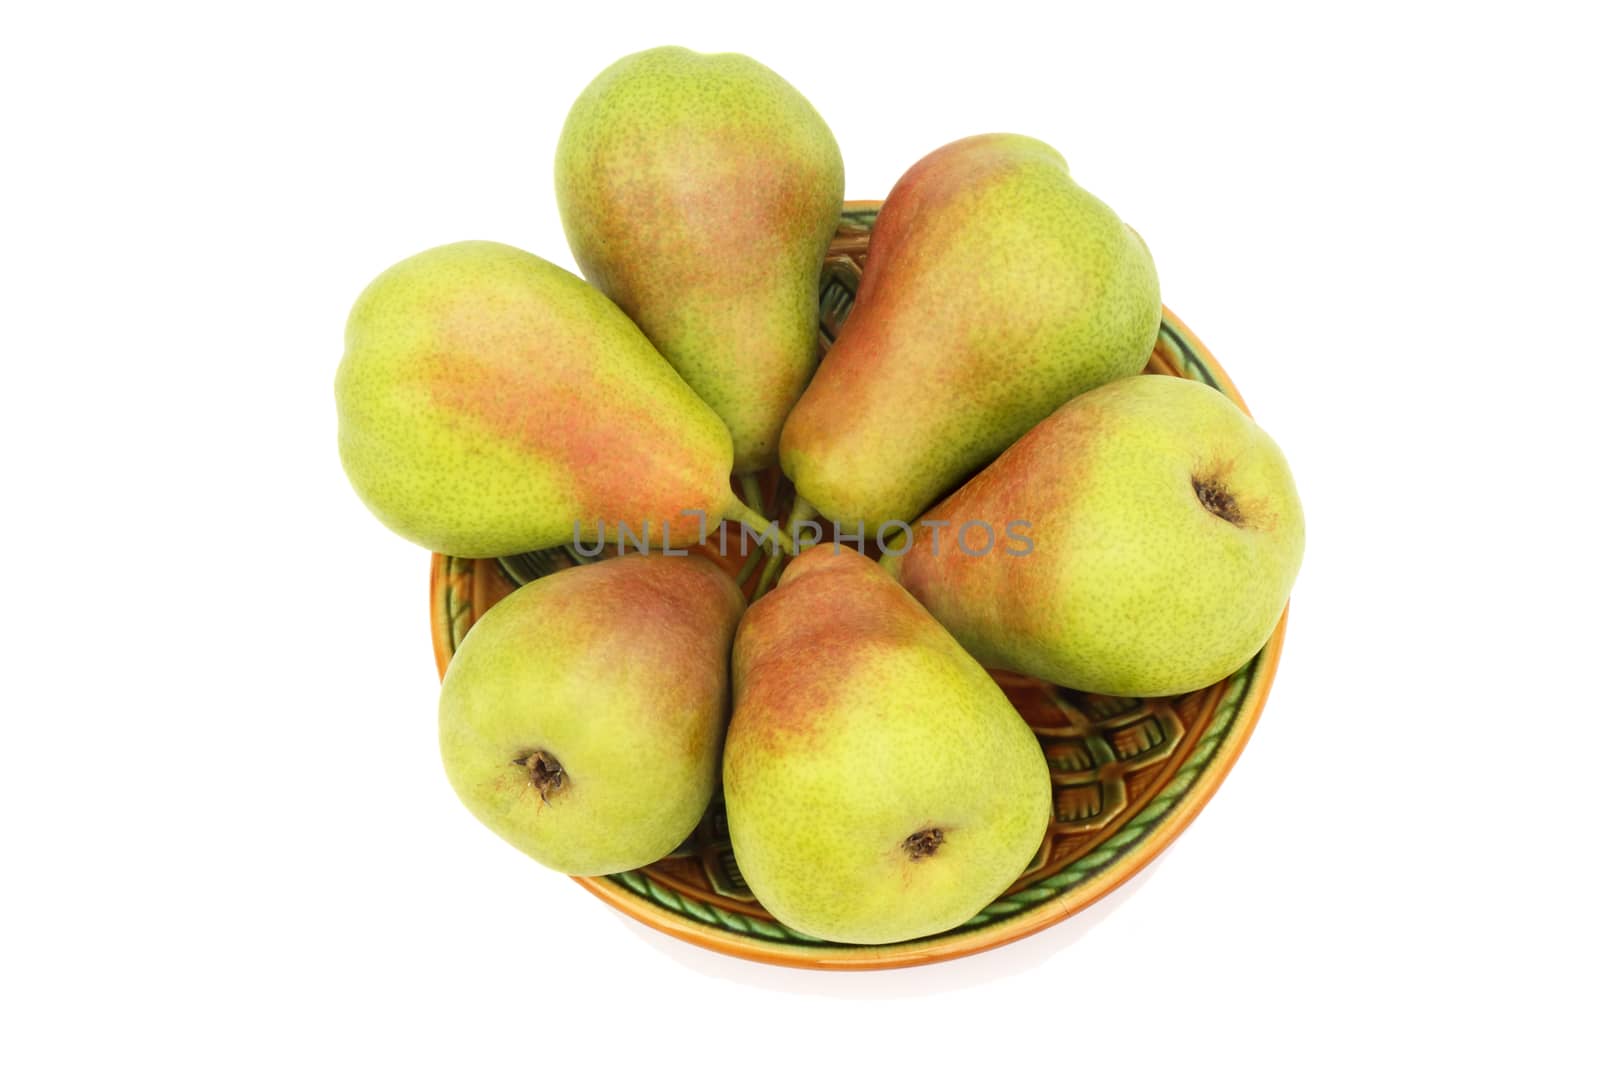 Large ripe yellow pears on a ceramic plate. Presented on a white background.